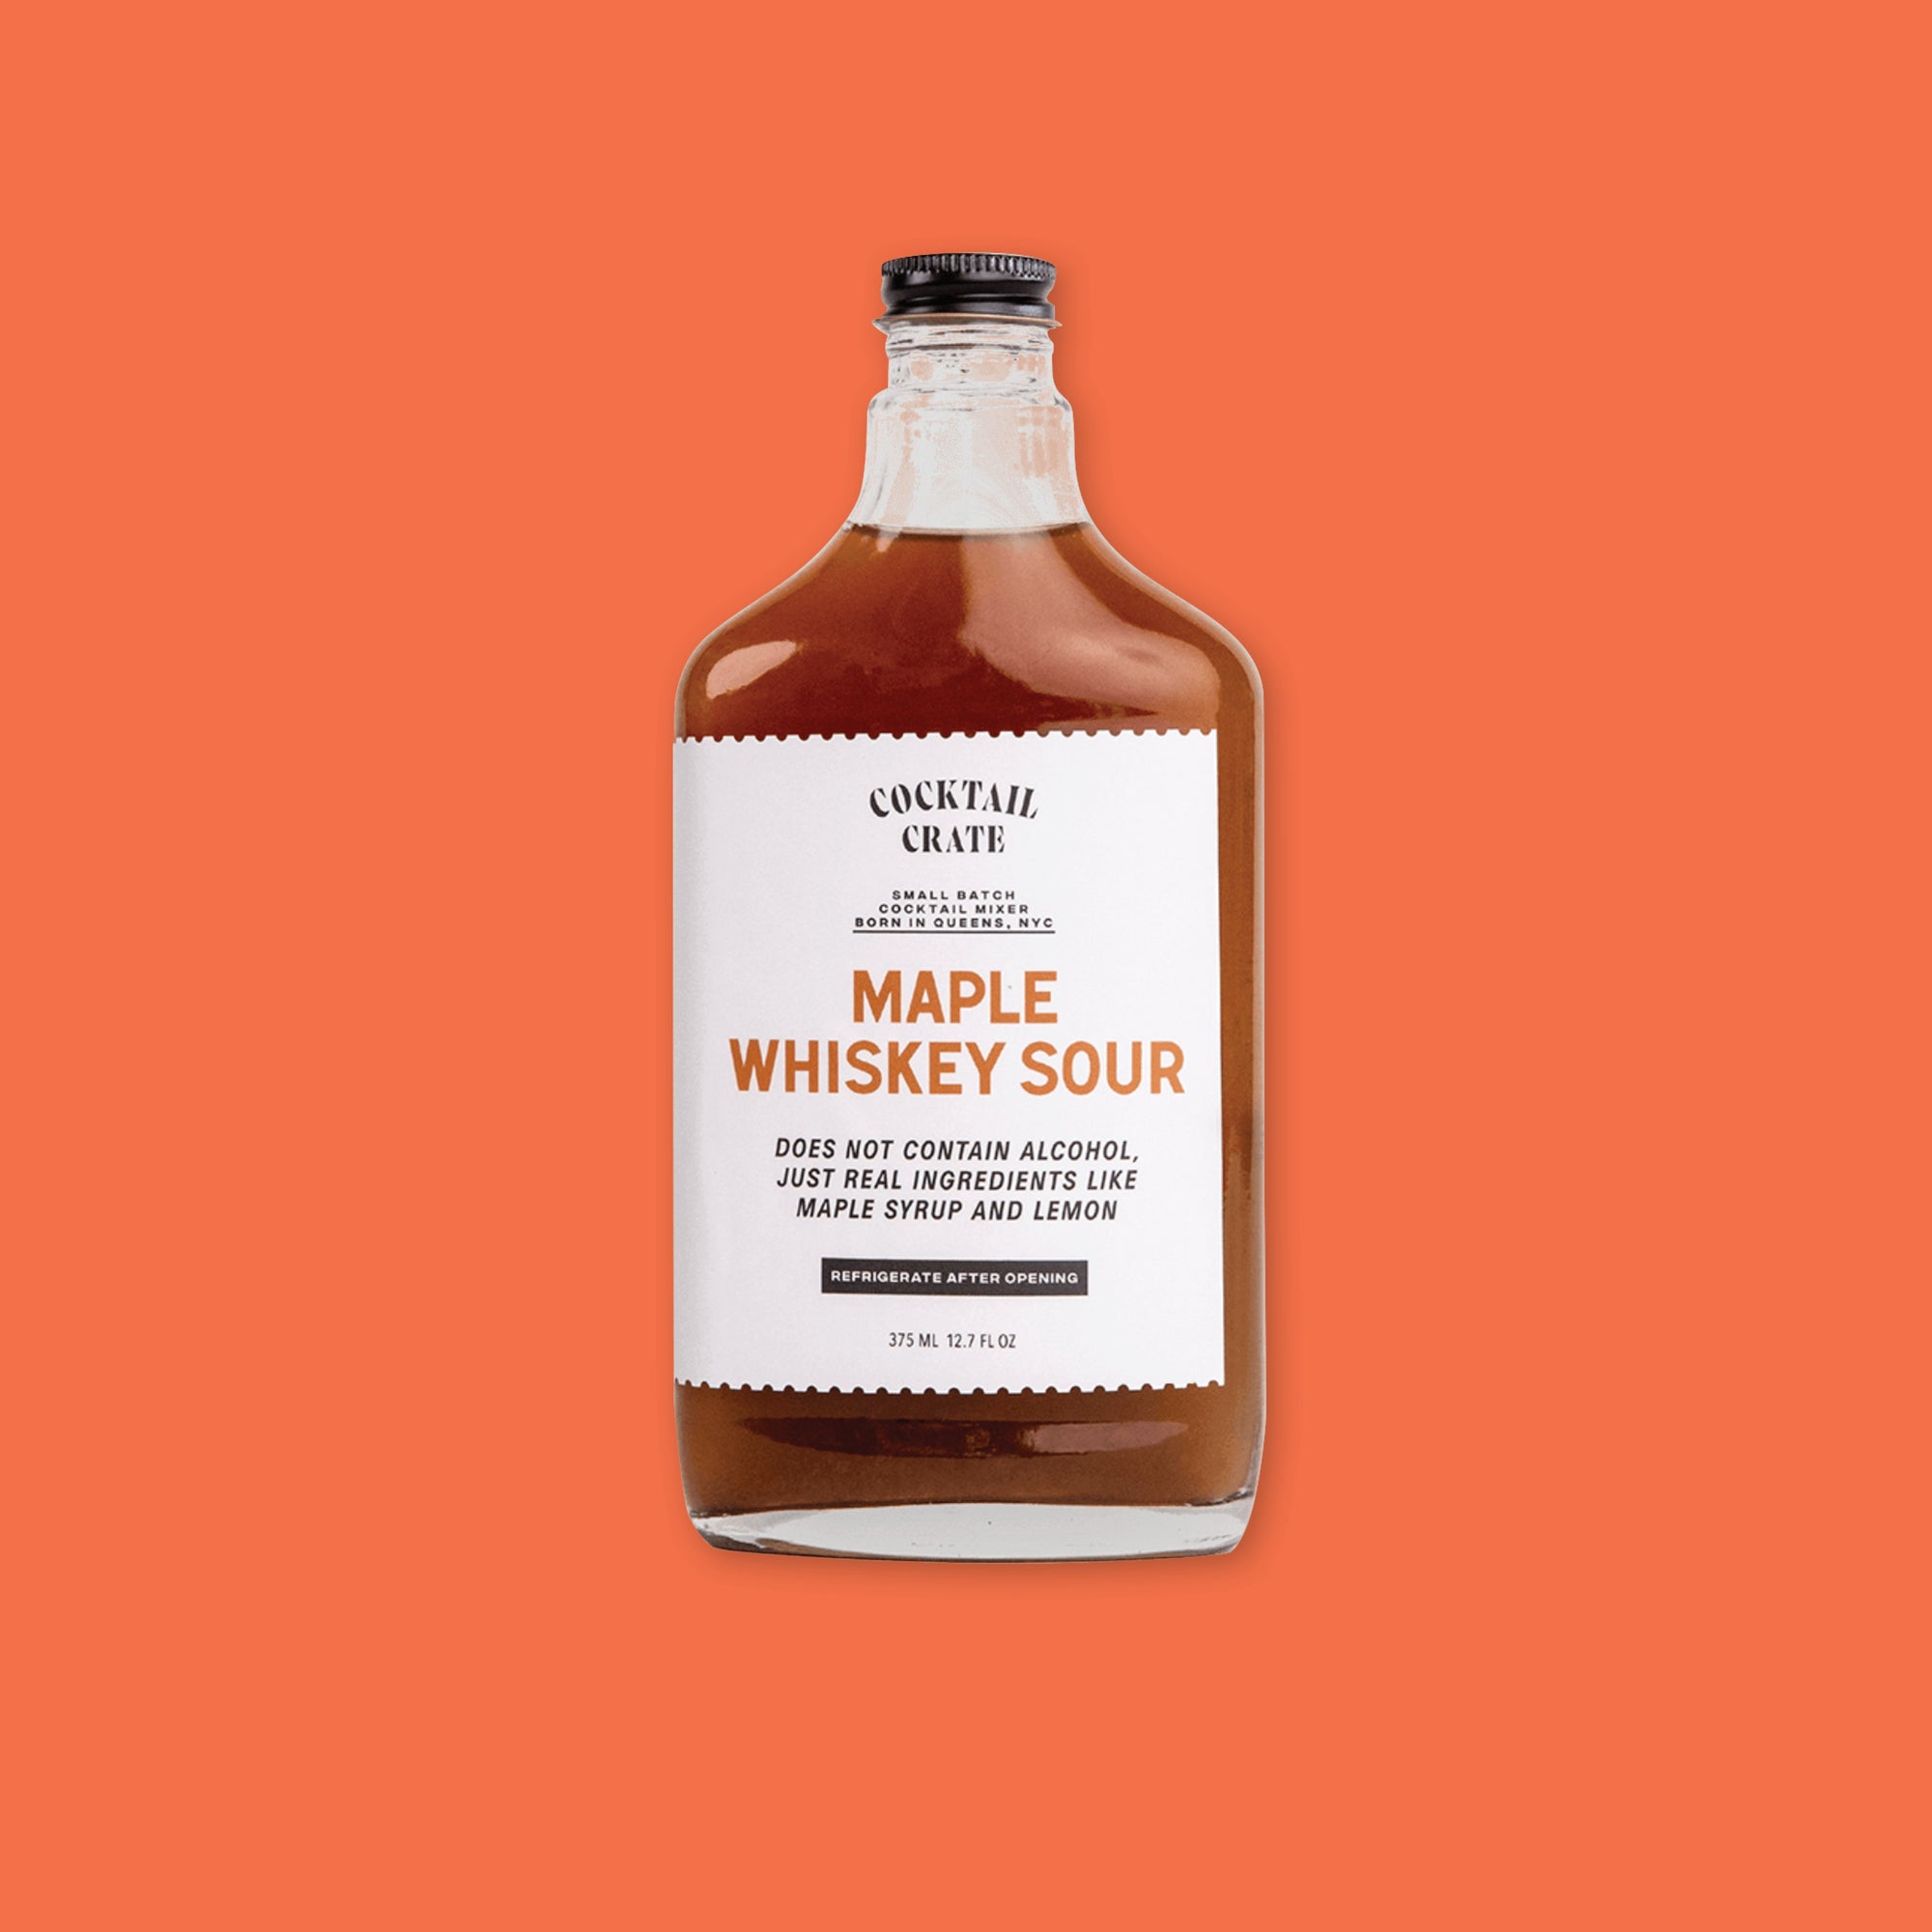 On an orangey-red background sits a jar. This COCKTAIL CRATE clear jar has a black lid and white label with brown syrup inside. It says "MAPLE WHISKEY SOUR" in a rust, all caps block font. It also says "DOES NOT CONTAIN ALCOHOL, JUST REAL INGREDIENTS LIKE MAPLE SYRUP AND LEMON" in black, all caps block italic font. In a black box it says "REFRIGERATE AFTER OPENING"  in white, all caps block font. 375 ML 12 FL OZ